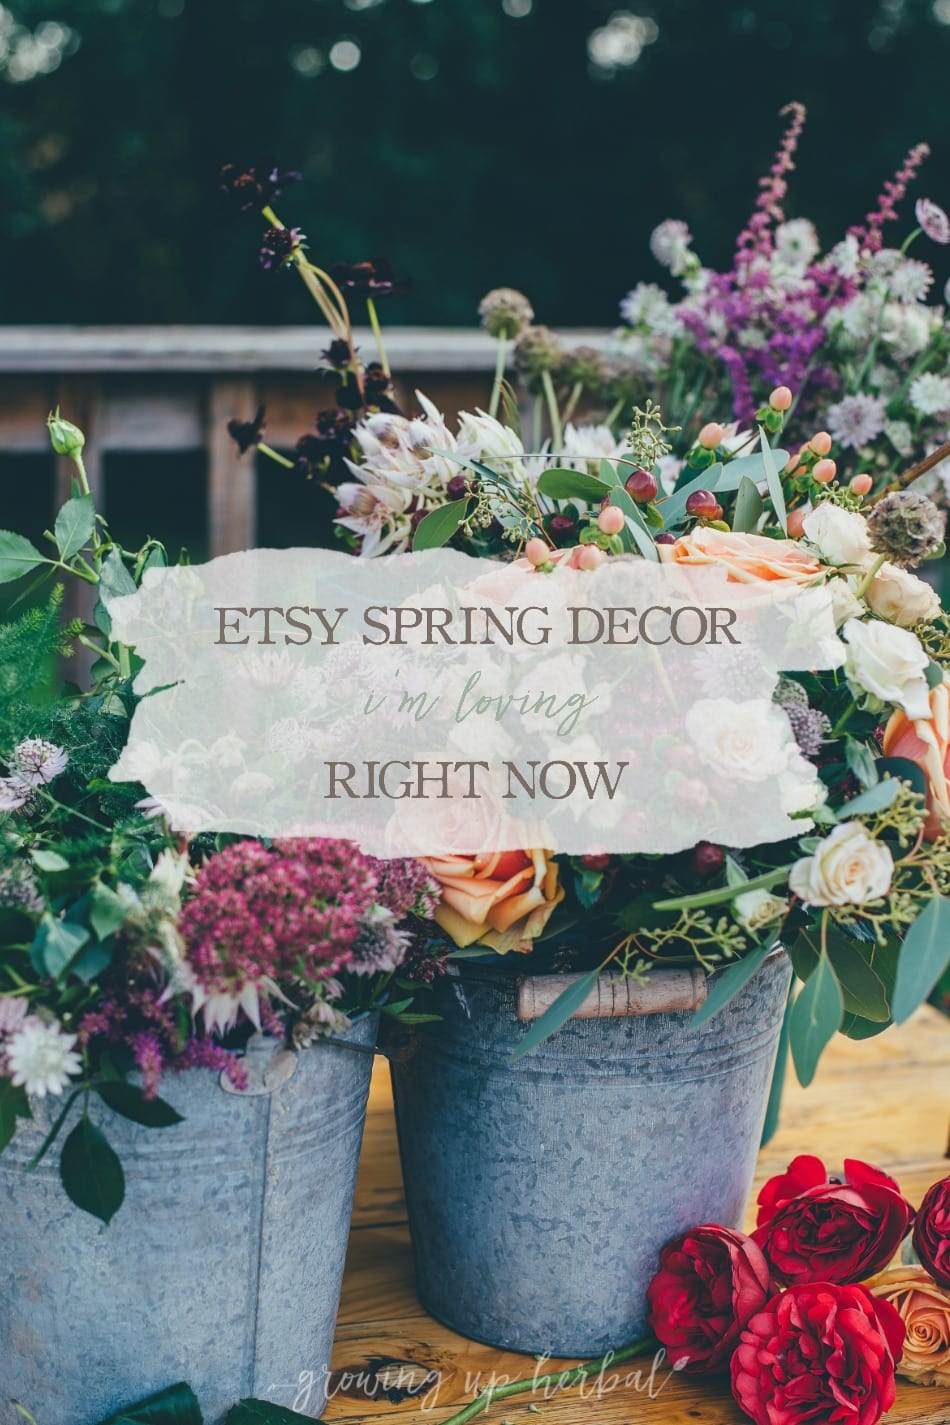 Etsy Spring Decor I'm Loving Right Now | Growing Up Herbal | If you’re like me, you’re ready to give your home a spring facelift. Here’s some handmade spring decor from Etsy that I’m loving this season!